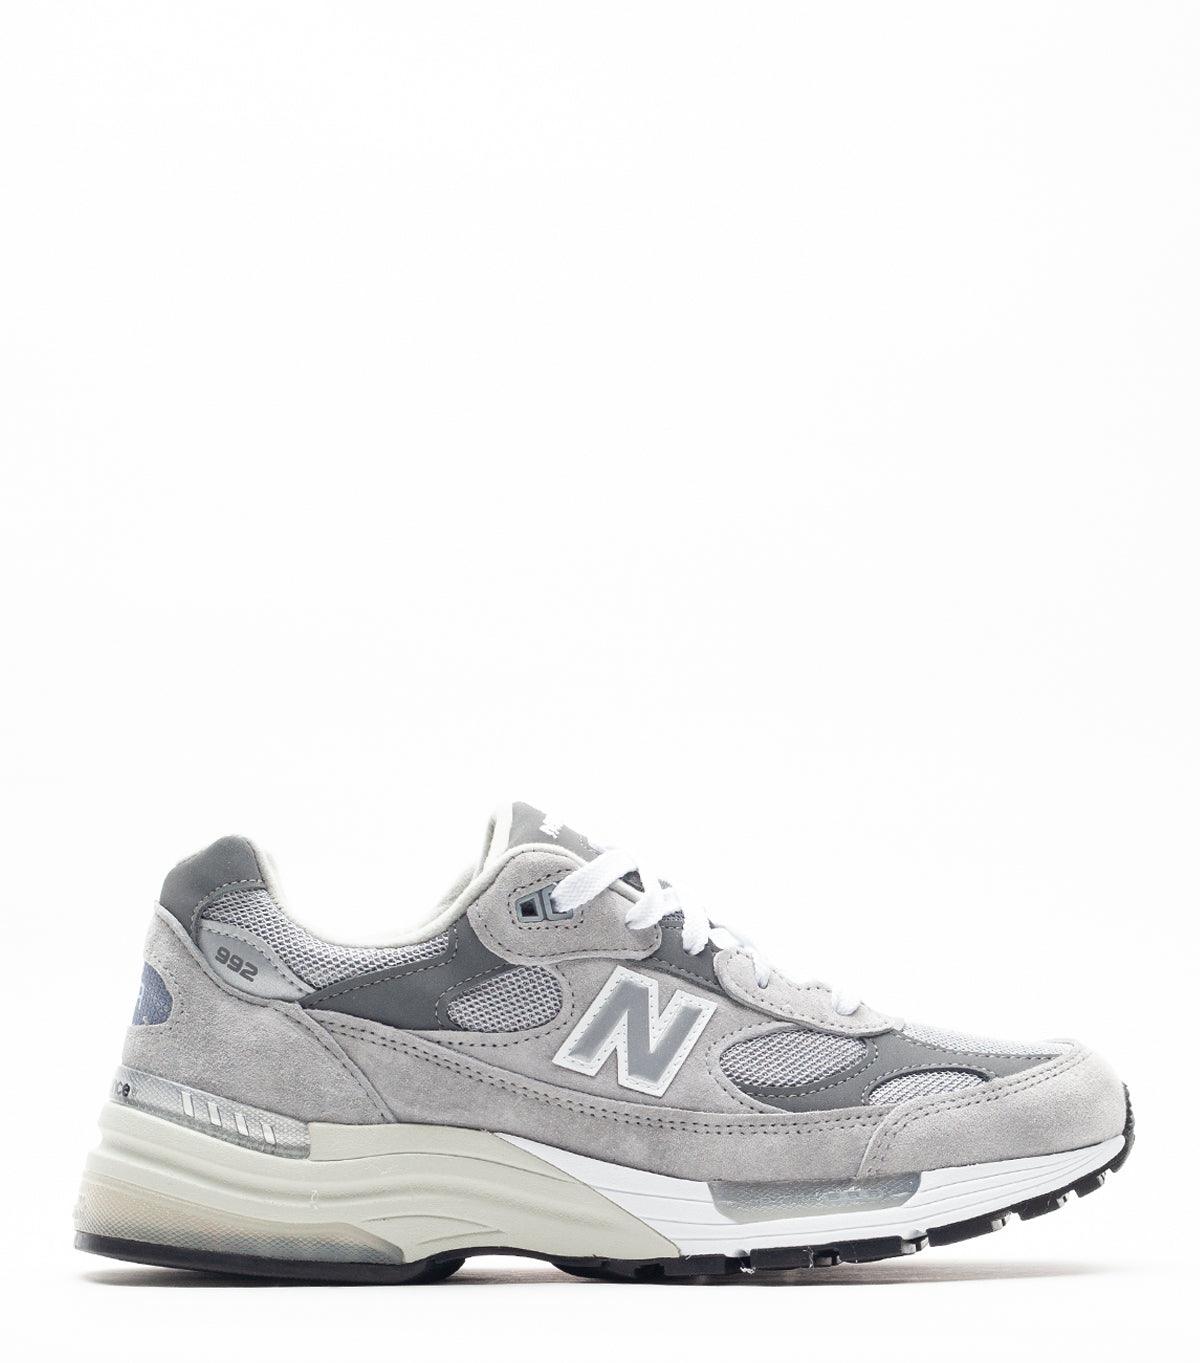 08.14.21 NEW BALANCE 992 MADE IN USE GREY